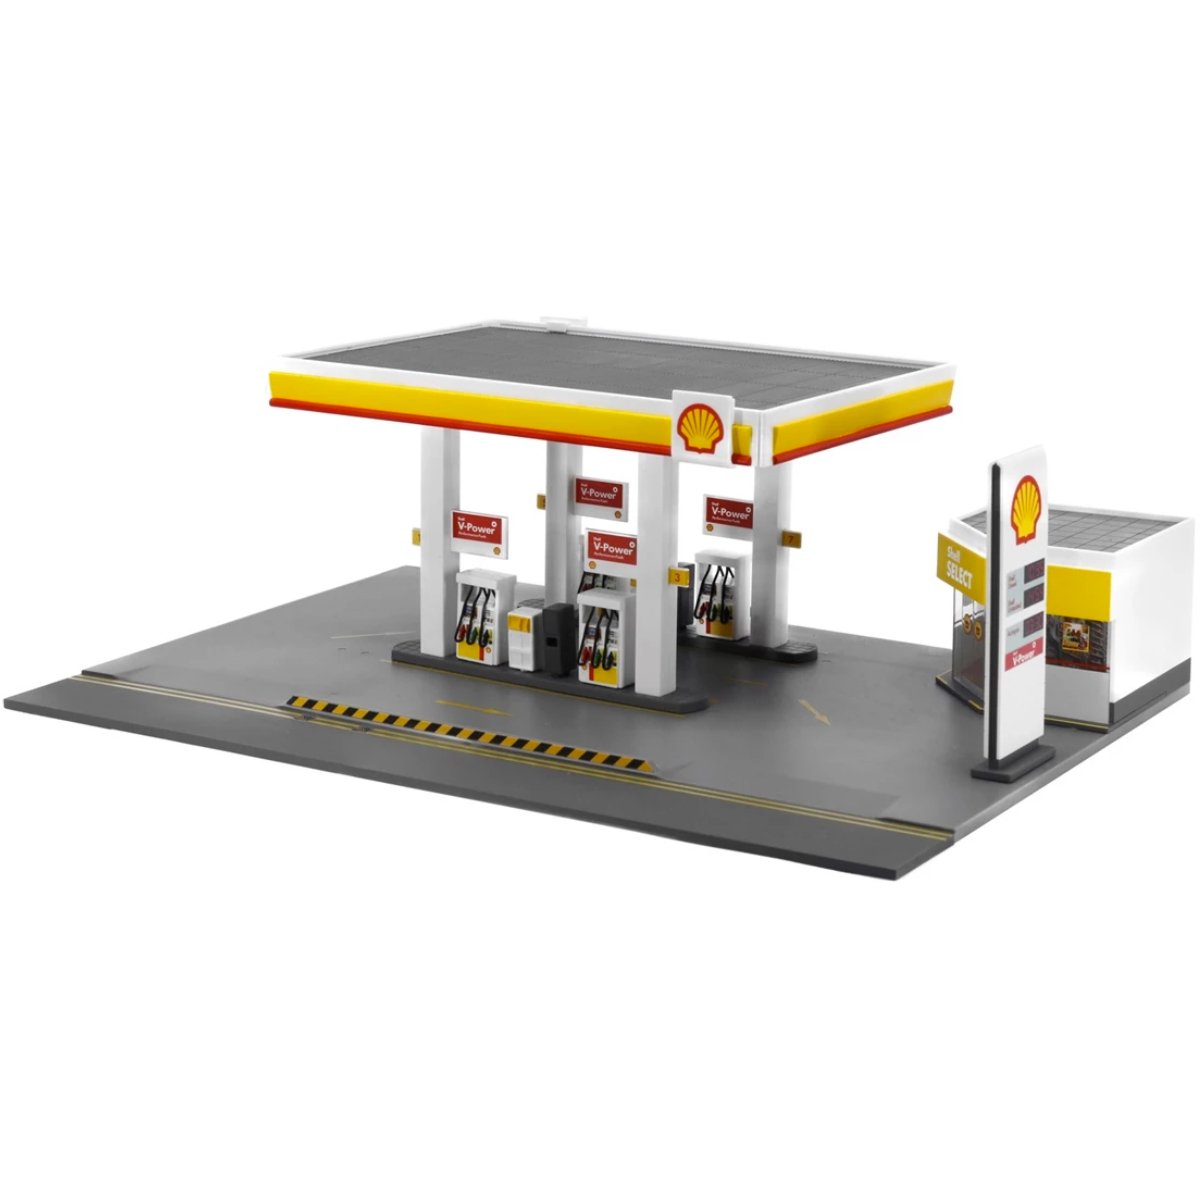 Tiny Models Shell Petrol Station Diorama Playset (1:64 / 1:76 Scale) - Phillips Hobbies